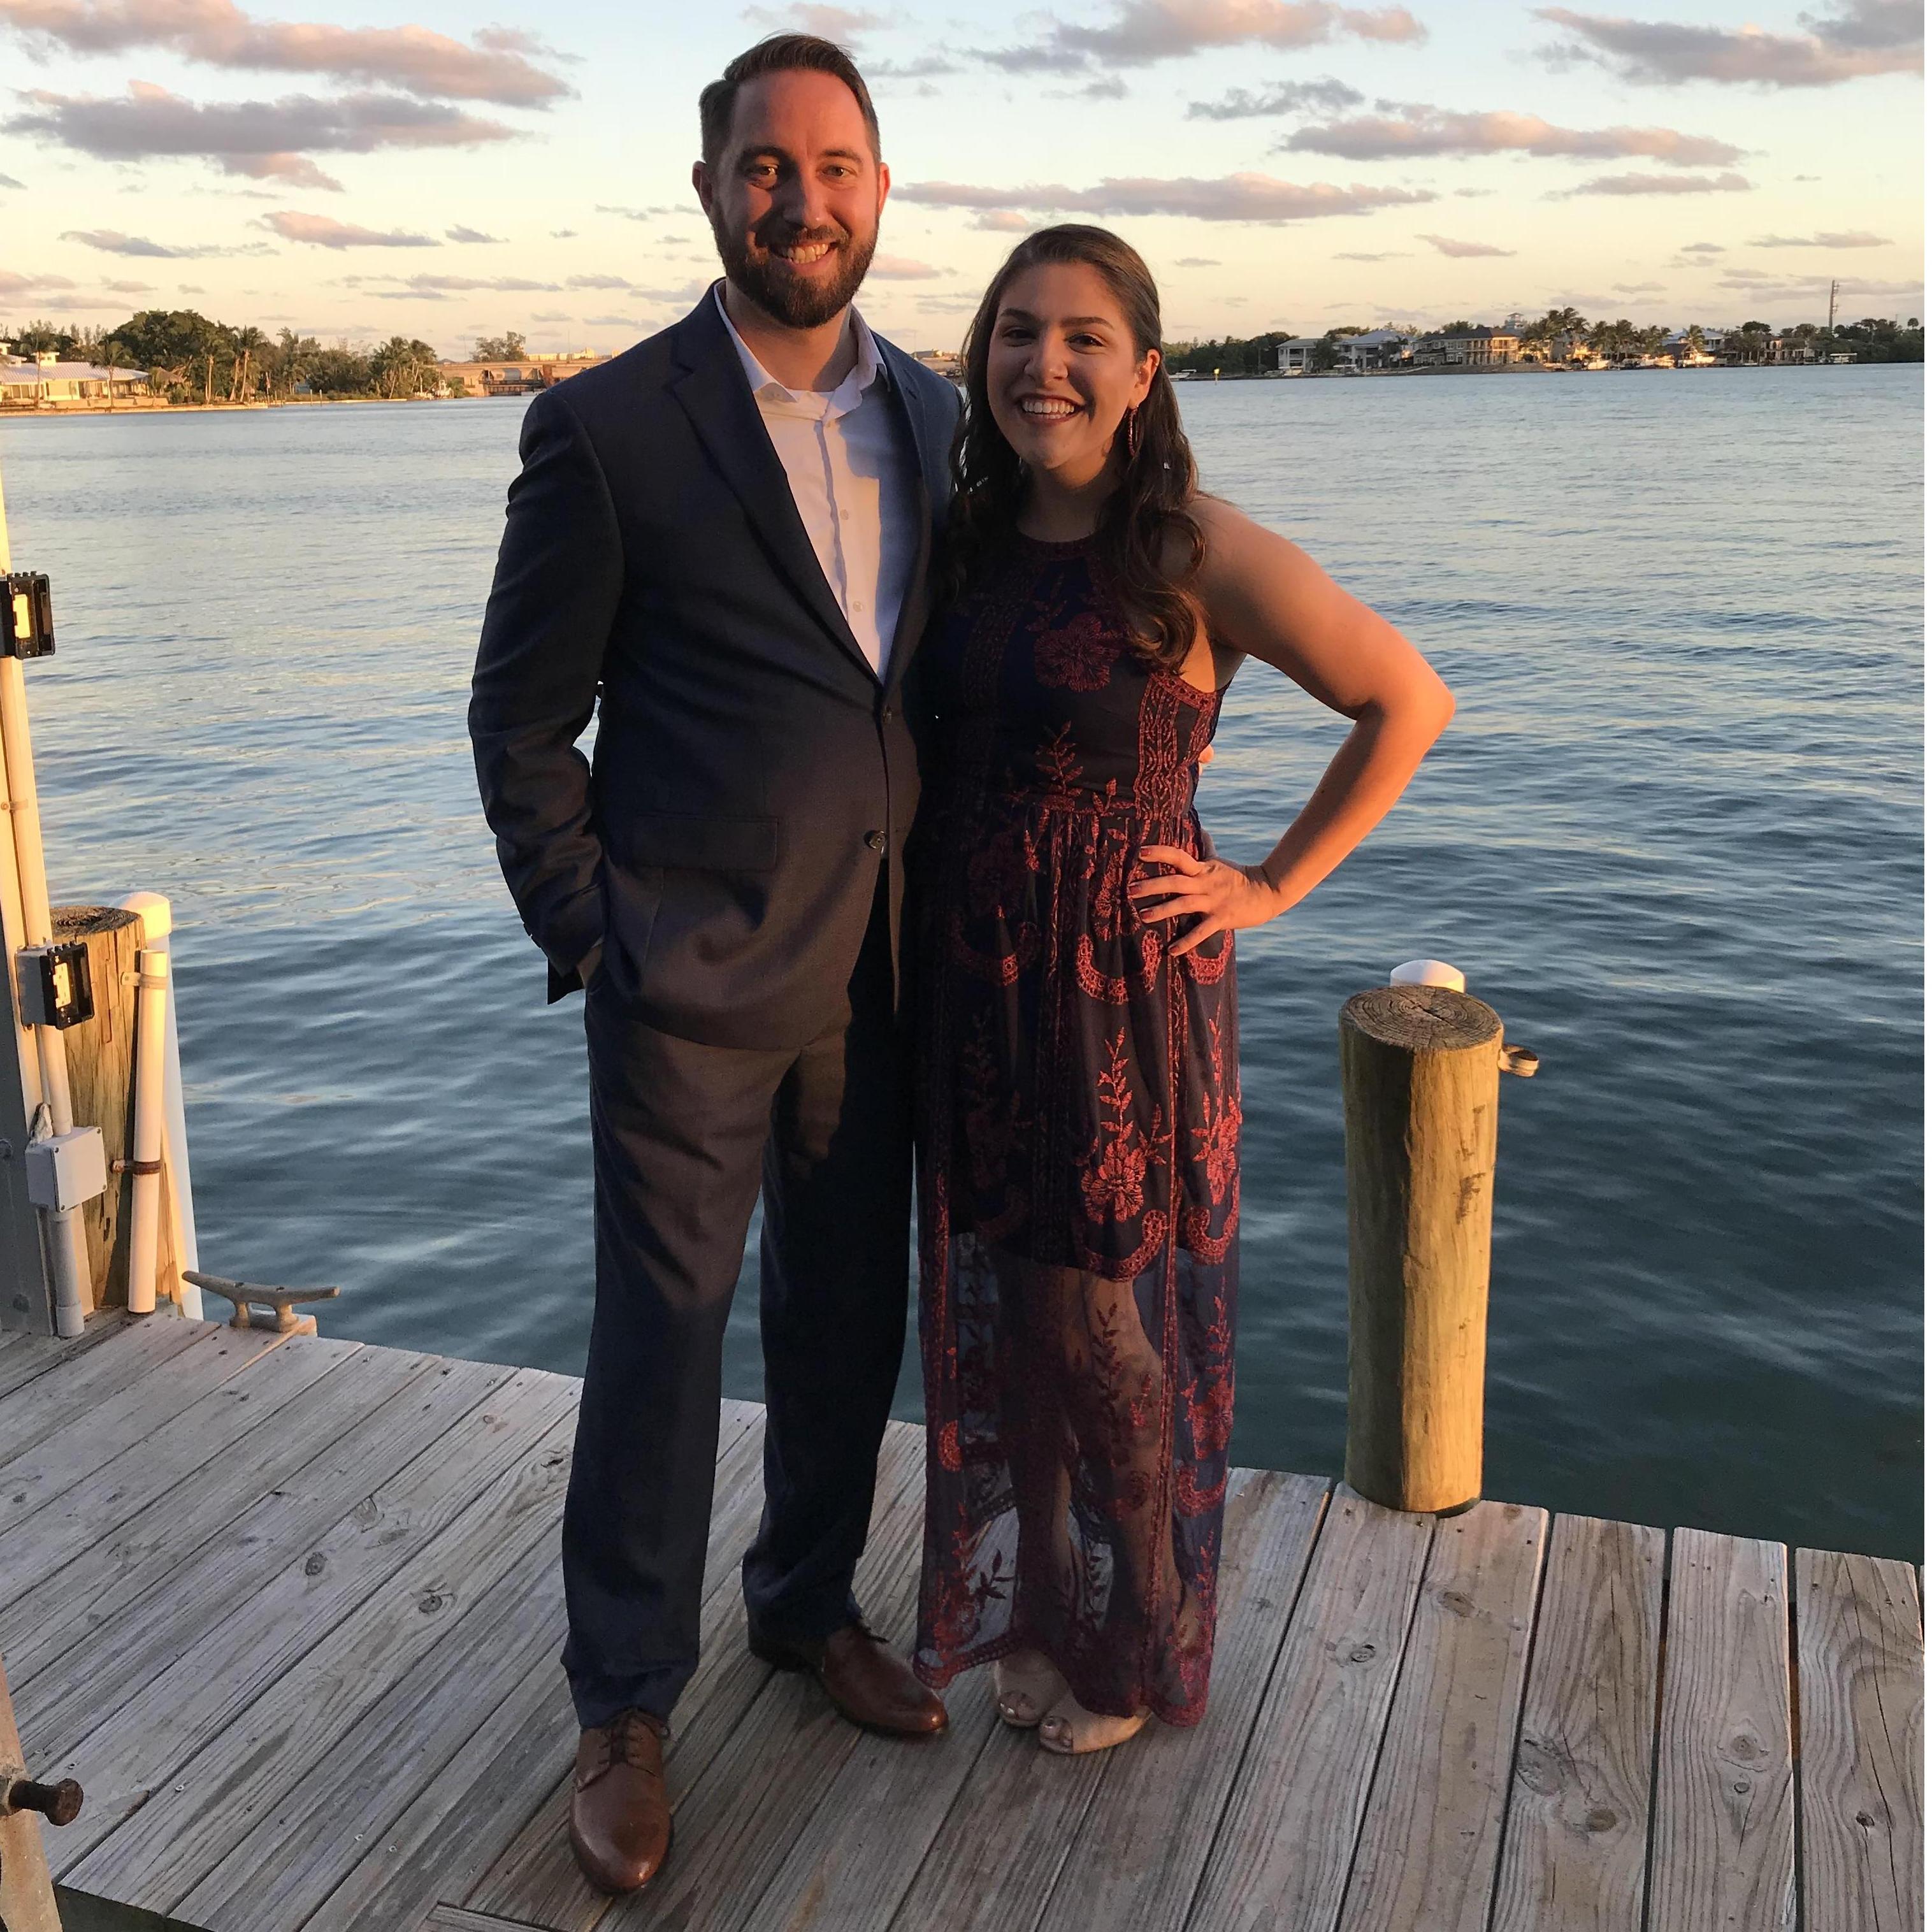 We love getting to travel together! This one is from Jupiter, FL from our friend Katie's wedding.